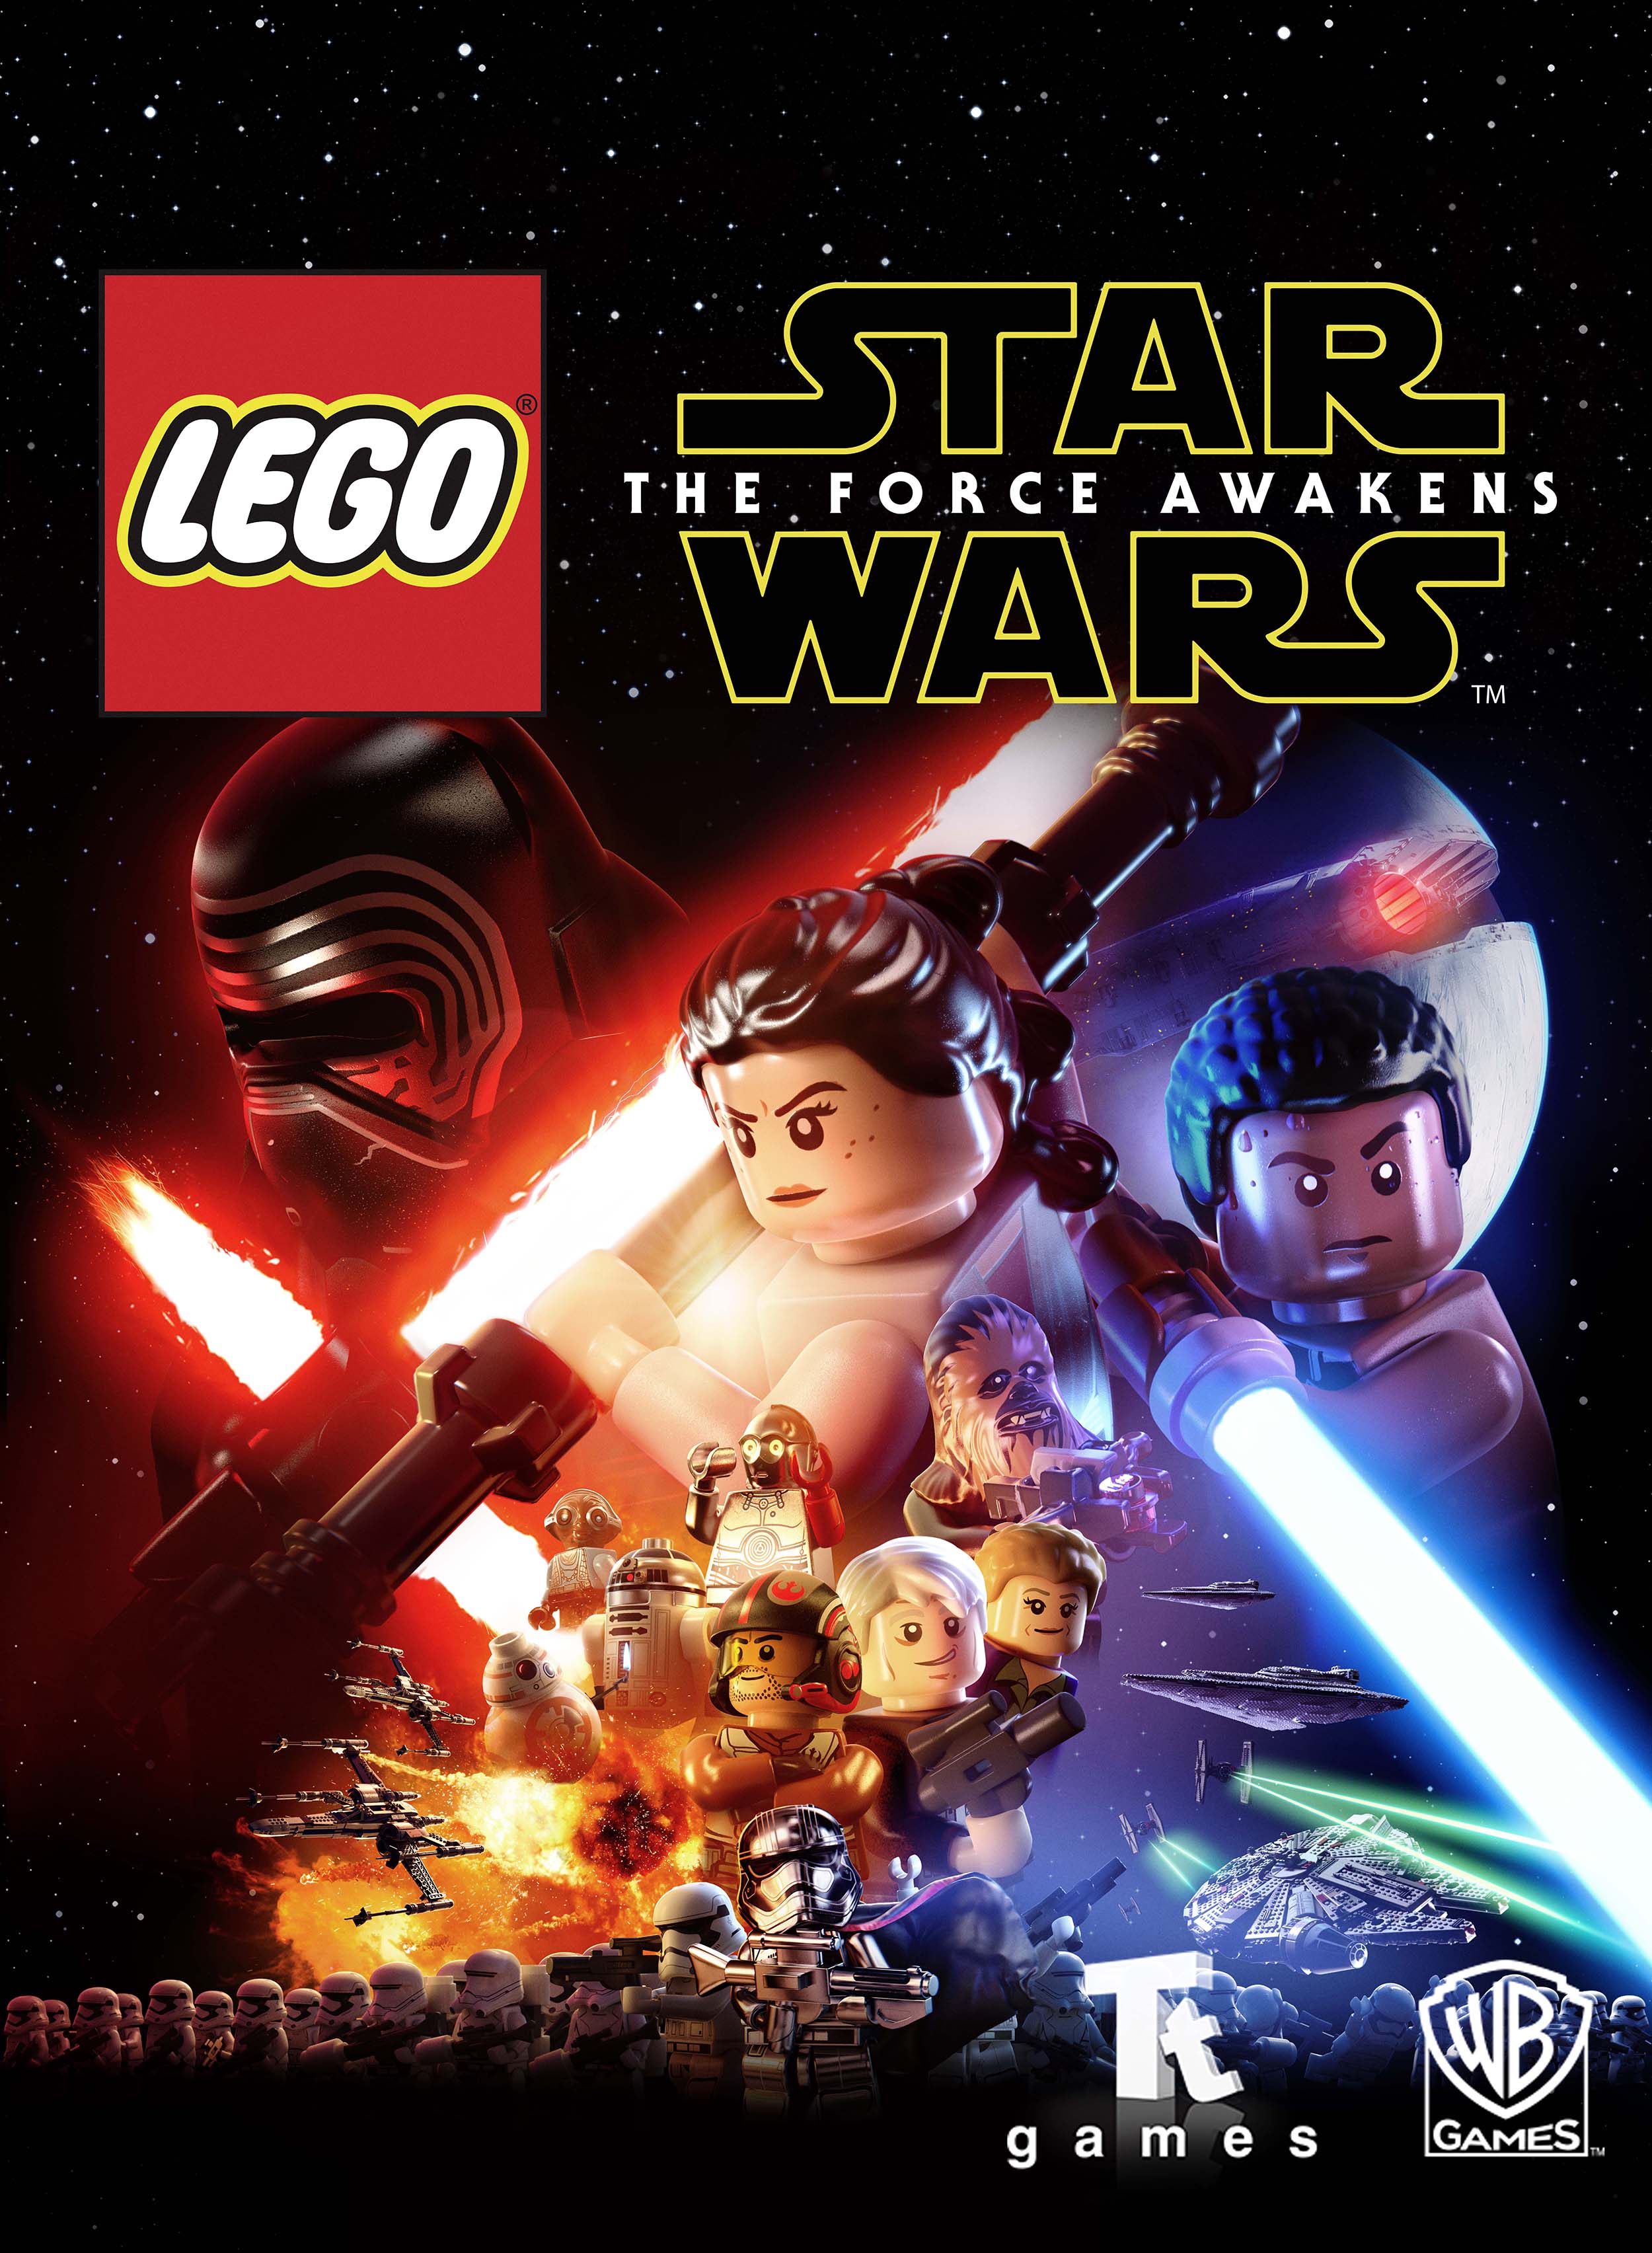 LEGO Star Wars: The Force Awakens - Jabba's Palace Character Pack (DLC)